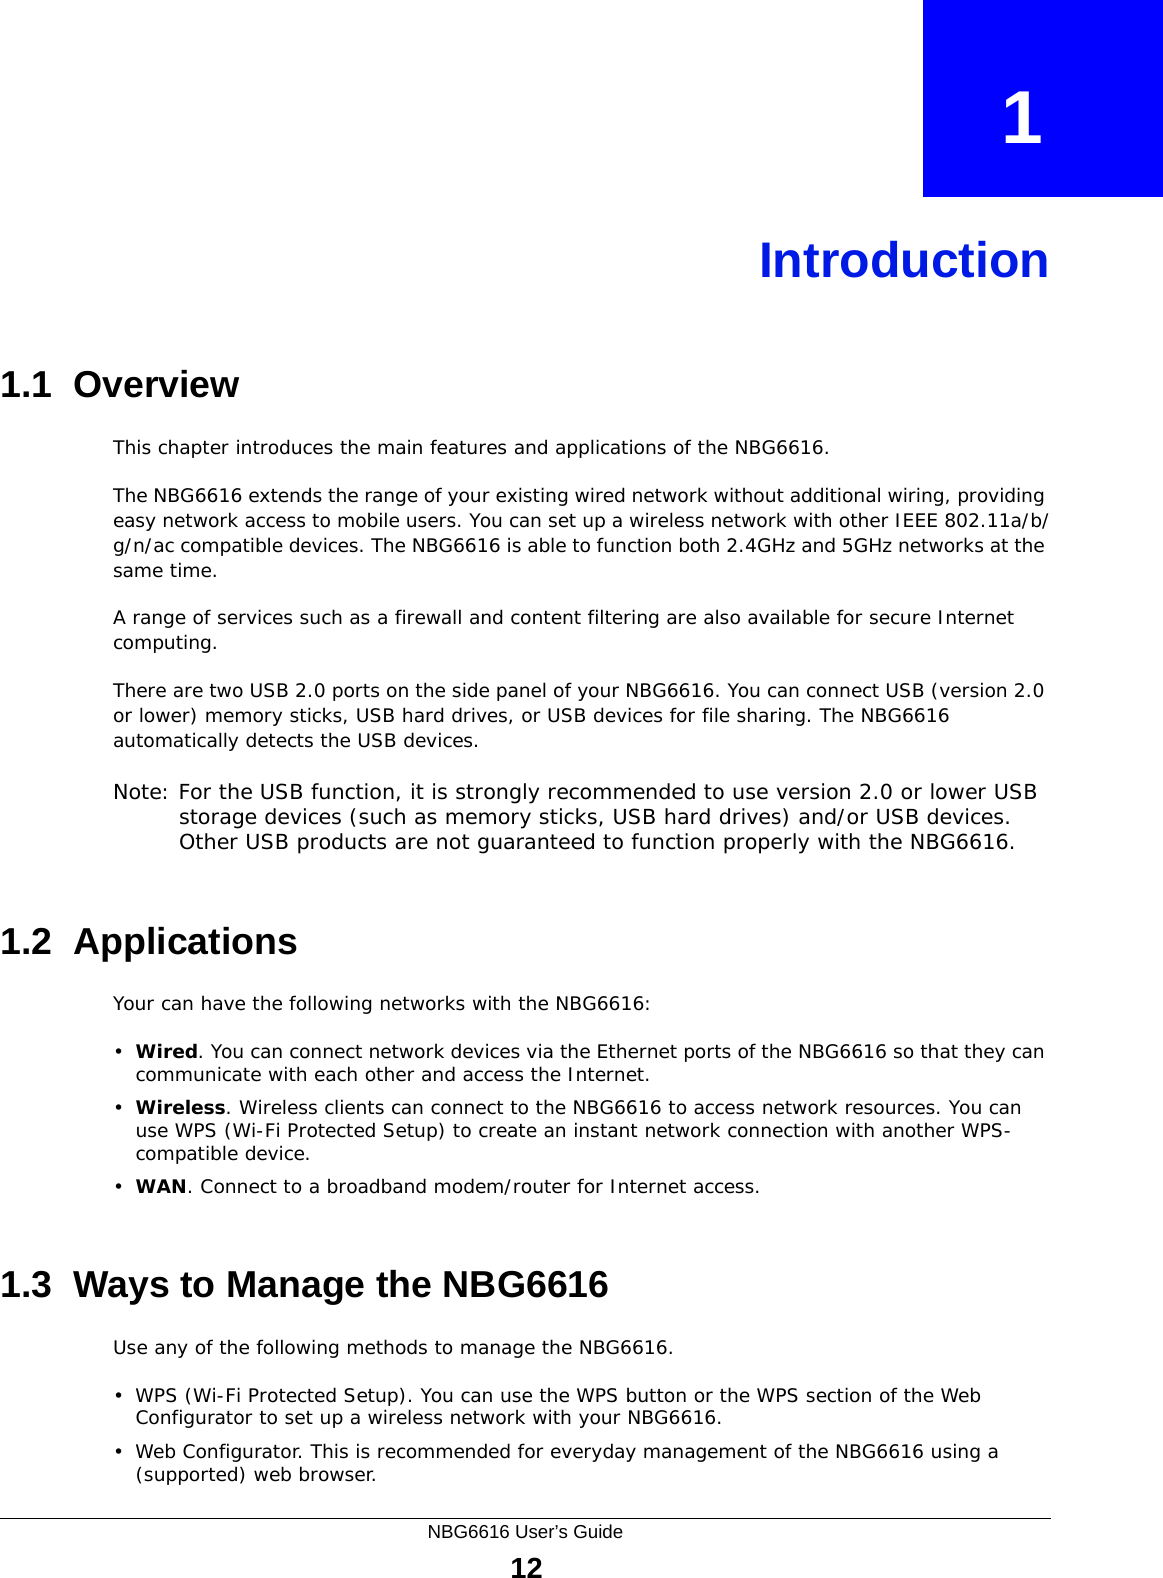 NBG6616 User’s Guide12CHAPTER   1Introduction1.1  OverviewThis chapter introduces the main features and applications of the NBG6616.The NBG6616 extends the range of your existing wired network without additional wiring, providing easy network access to mobile users. You can set up a wireless network with other IEEE 802.11a/b/g/n/ac compatible devices. The NBG6616 is able to function both 2.4GHz and 5GHz networks at the same time.A range of services such as a firewall and content filtering are also available for secure Internet computing. There are two USB 2.0 ports on the side panel of your NBG6616. You can connect USB (version 2.0 or lower) memory sticks, USB hard drives, or USB devices for file sharing. The NBG6616 automatically detects the USB devices. Note: For the USB function, it is strongly recommended to use version 2.0 or lower USB storage devices (such as memory sticks, USB hard drives) and/or USB devices. Other USB products are not guaranteed to function properly with the NBG6616.1.2  ApplicationsYour can have the following networks with the NBG6616:•Wired. You can connect network devices via the Ethernet ports of the NBG6616 so that they can communicate with each other and access the Internet.•Wireless. Wireless clients can connect to the NBG6616 to access network resources. You can use WPS (Wi-Fi Protected Setup) to create an instant network connection with another WPS-compatible device.•WAN. Connect to a broadband modem/router for Internet access.1.3  Ways to Manage the NBG6616Use any of the following methods to manage the NBG6616.• WPS (Wi-Fi Protected Setup). You can use the WPS button or the WPS section of the Web Configurator to set up a wireless network with your NBG6616.• Web Configurator. This is recommended for everyday management of the NBG6616 using a (supported) web browser.